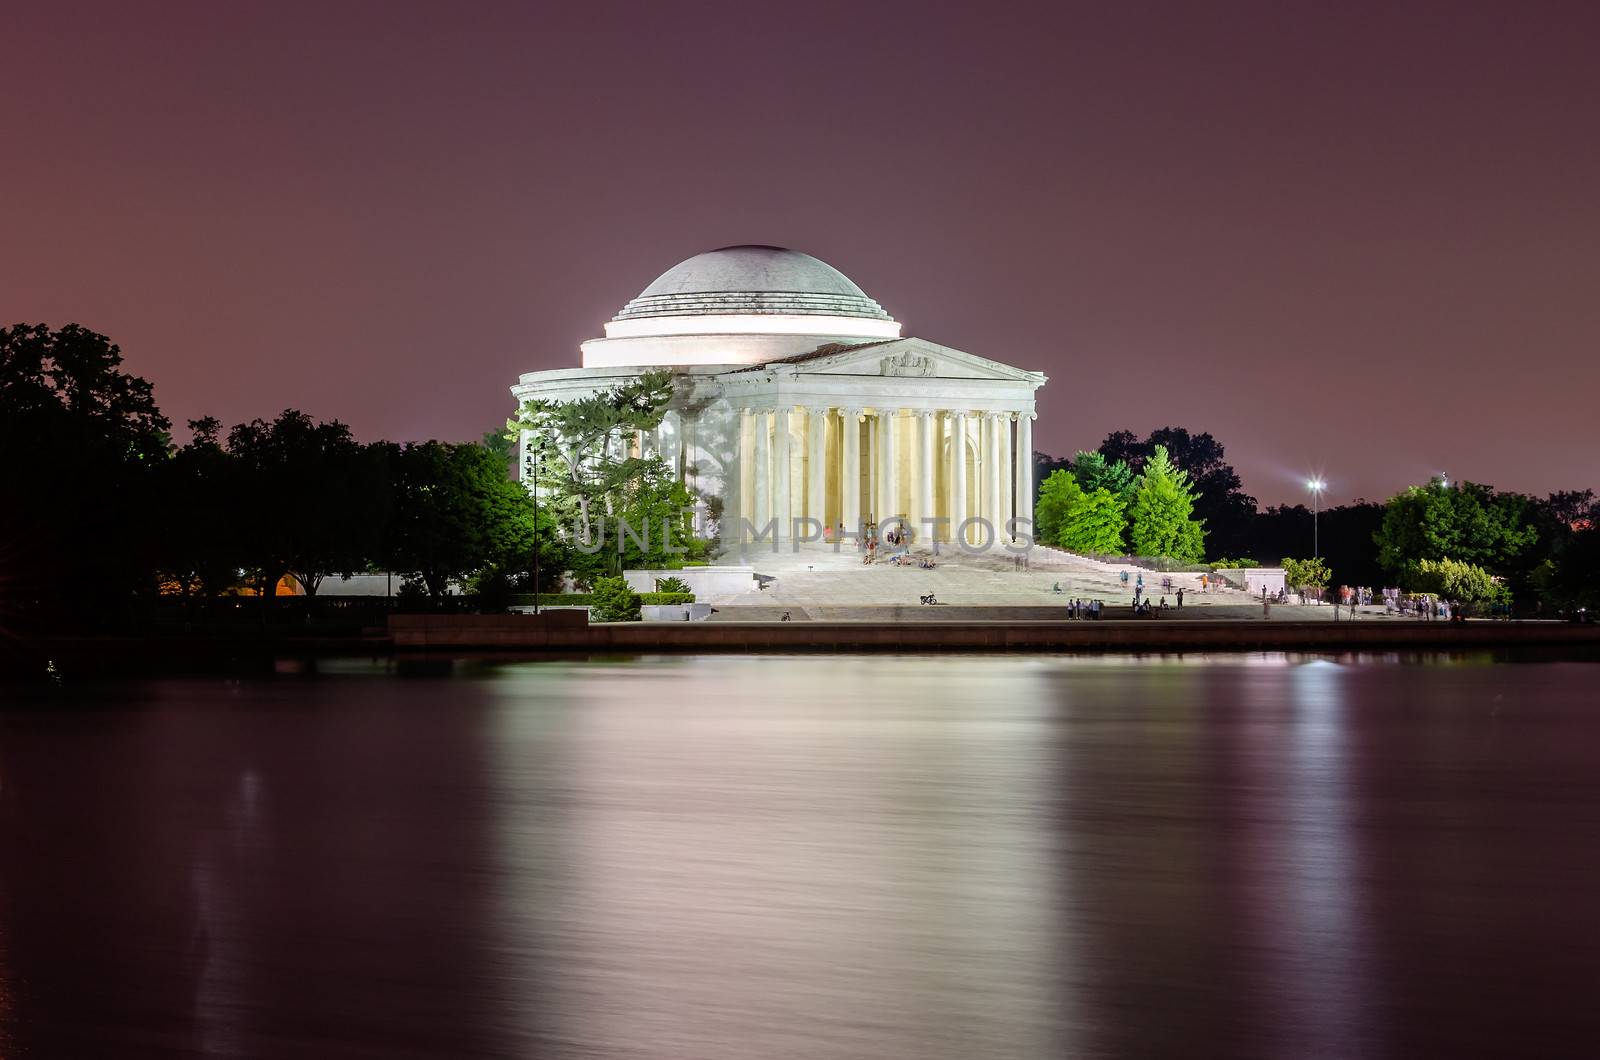 Scenic night view of the Jefferson Memorial in Washington DC reflecting in the Tidal Basin